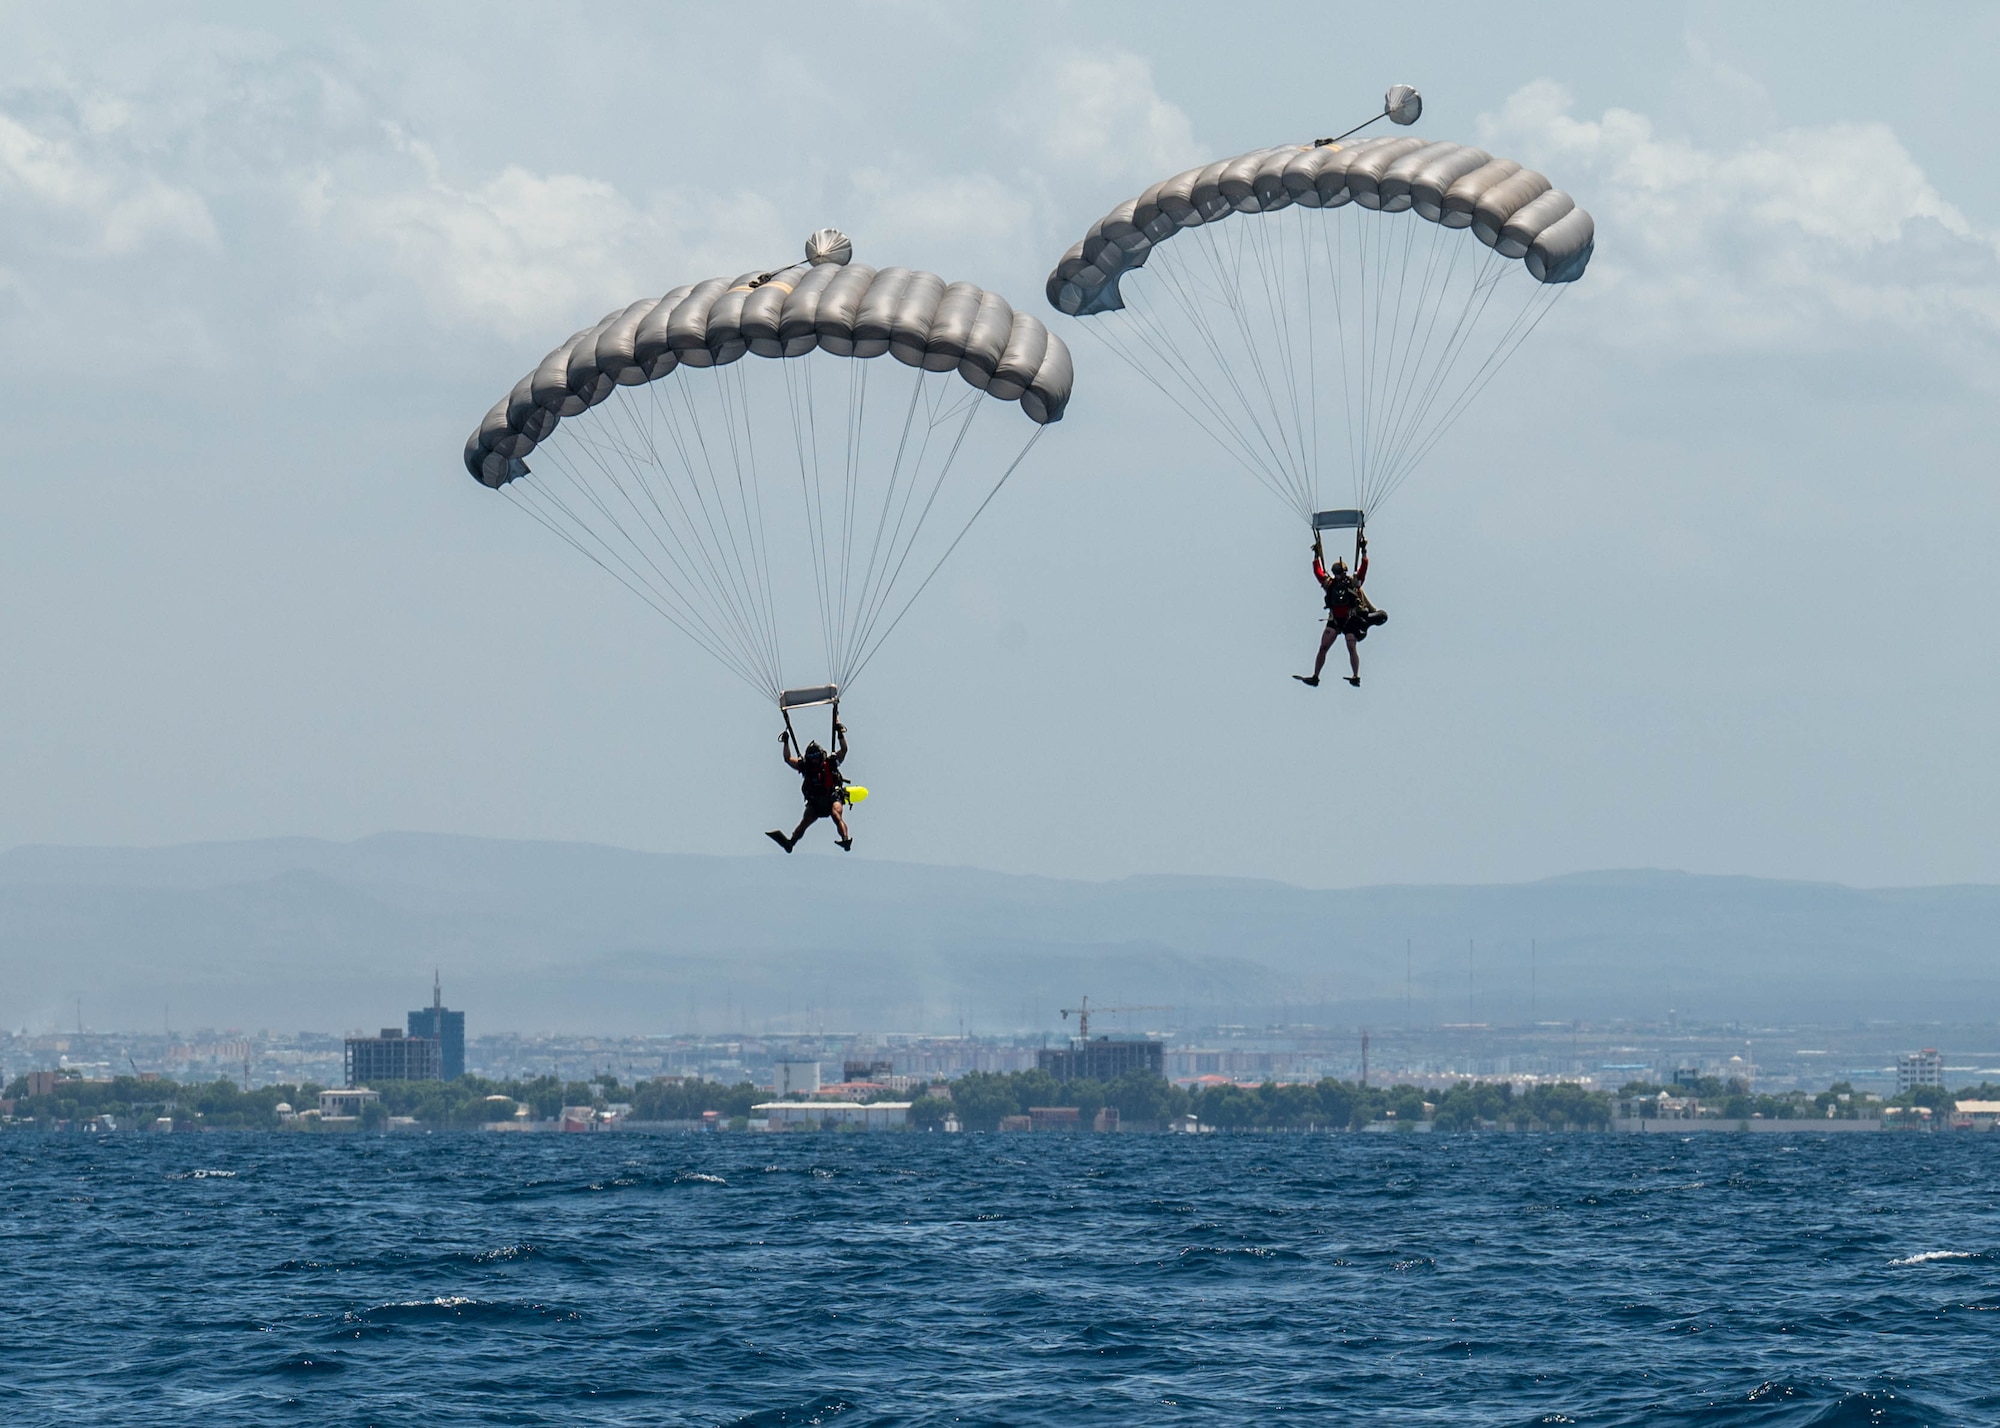 Two U.S. servicemembers parachute above water.